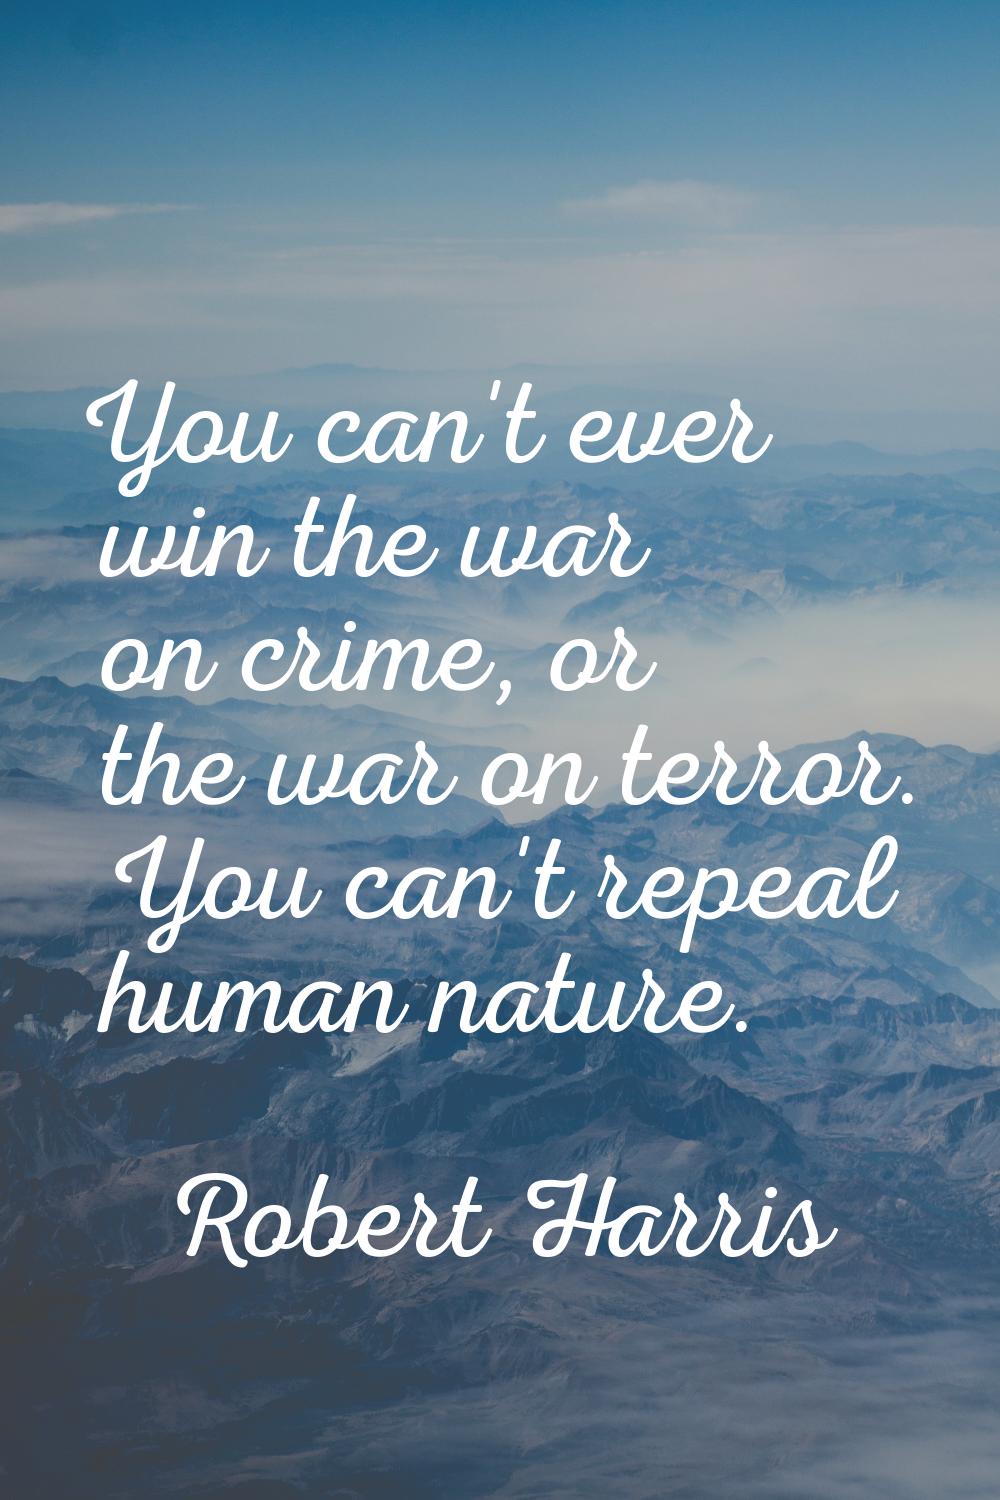 You can't ever win the war on crime, or the war on terror. You can't repeal human nature.